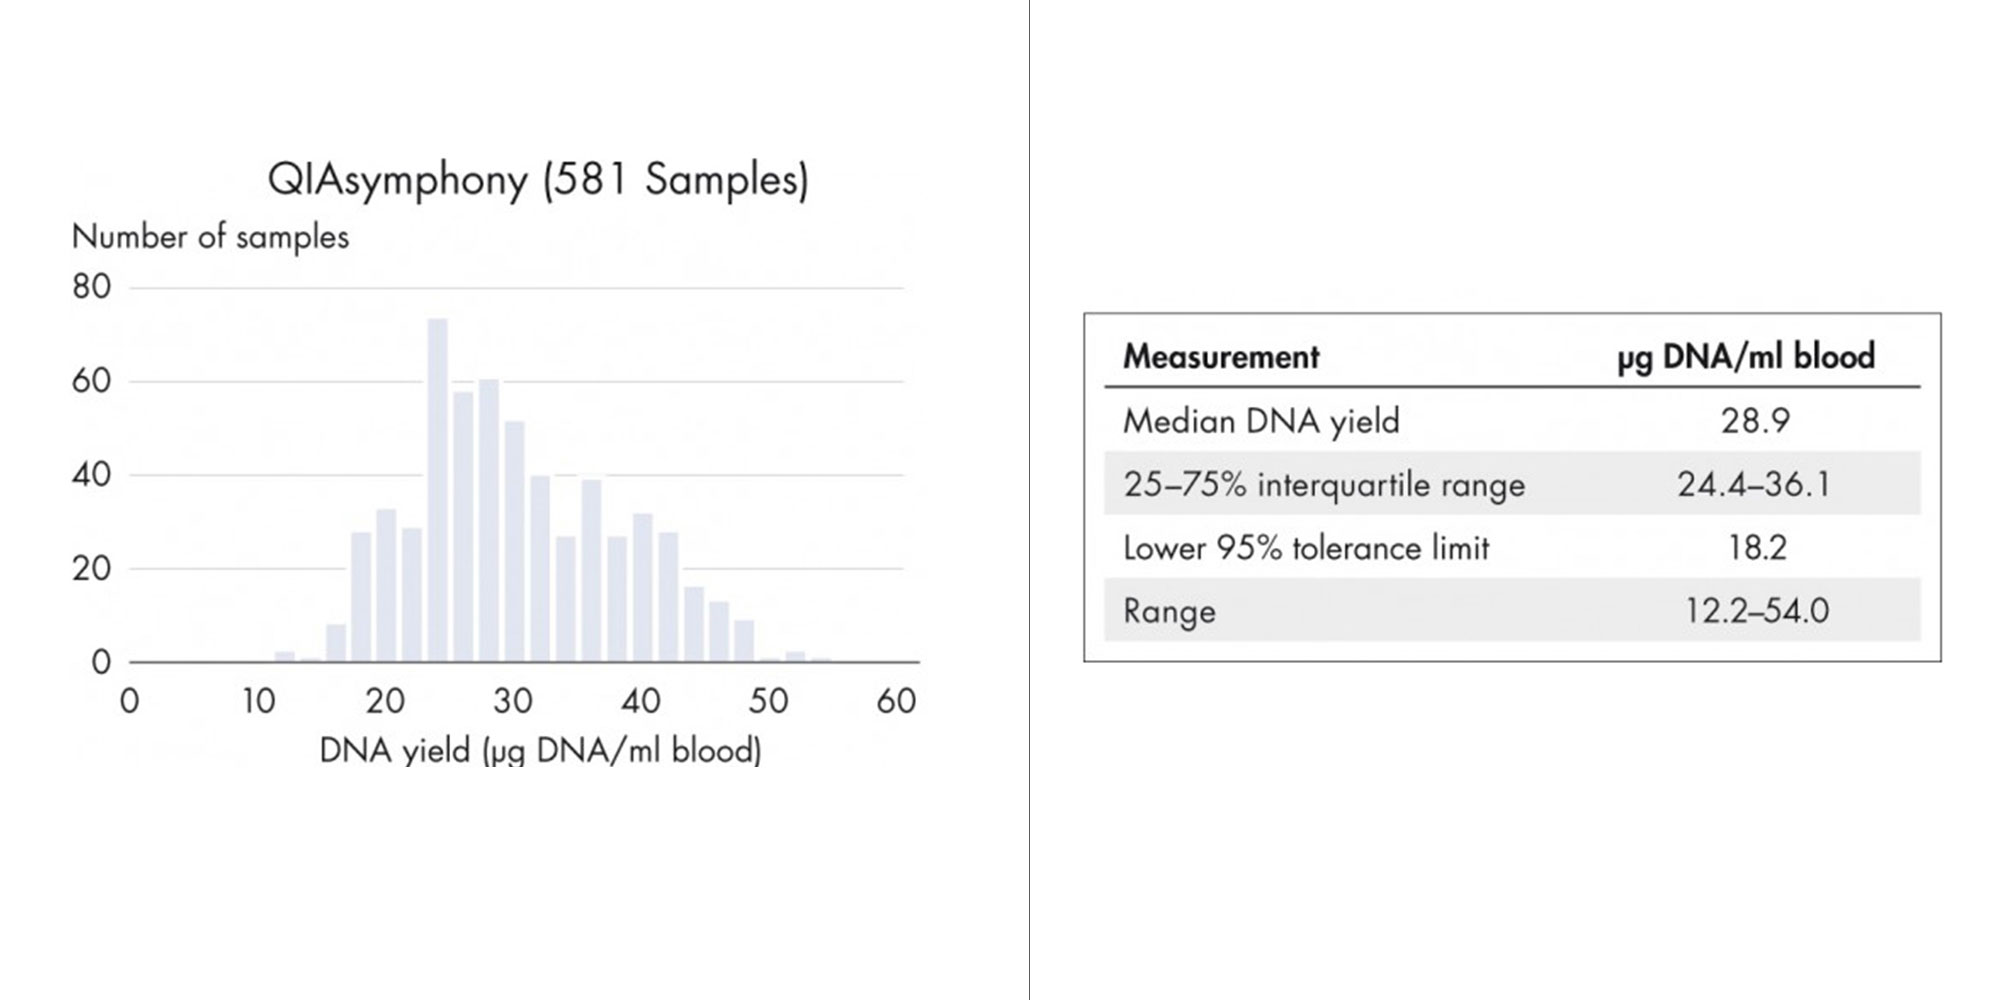 Samples collected in PAXgene Blood DNA Tubes (IVD) were processed at one site (internal) on the QIAsymphony, which performs automated DNA purification based on magnetic bead extraction. Median DNA yield was 28.9 µg DNA/ml blood, with 95% of samples ≥18.2 µg DNA/m blood. DNA purity is equally high, with an A260/A280 ratio of 1.7–1.9. Extraction was performed using QIAsymphony DSP DNA Kits (200 µl blood sample input, 200 µl DNA eluate output).